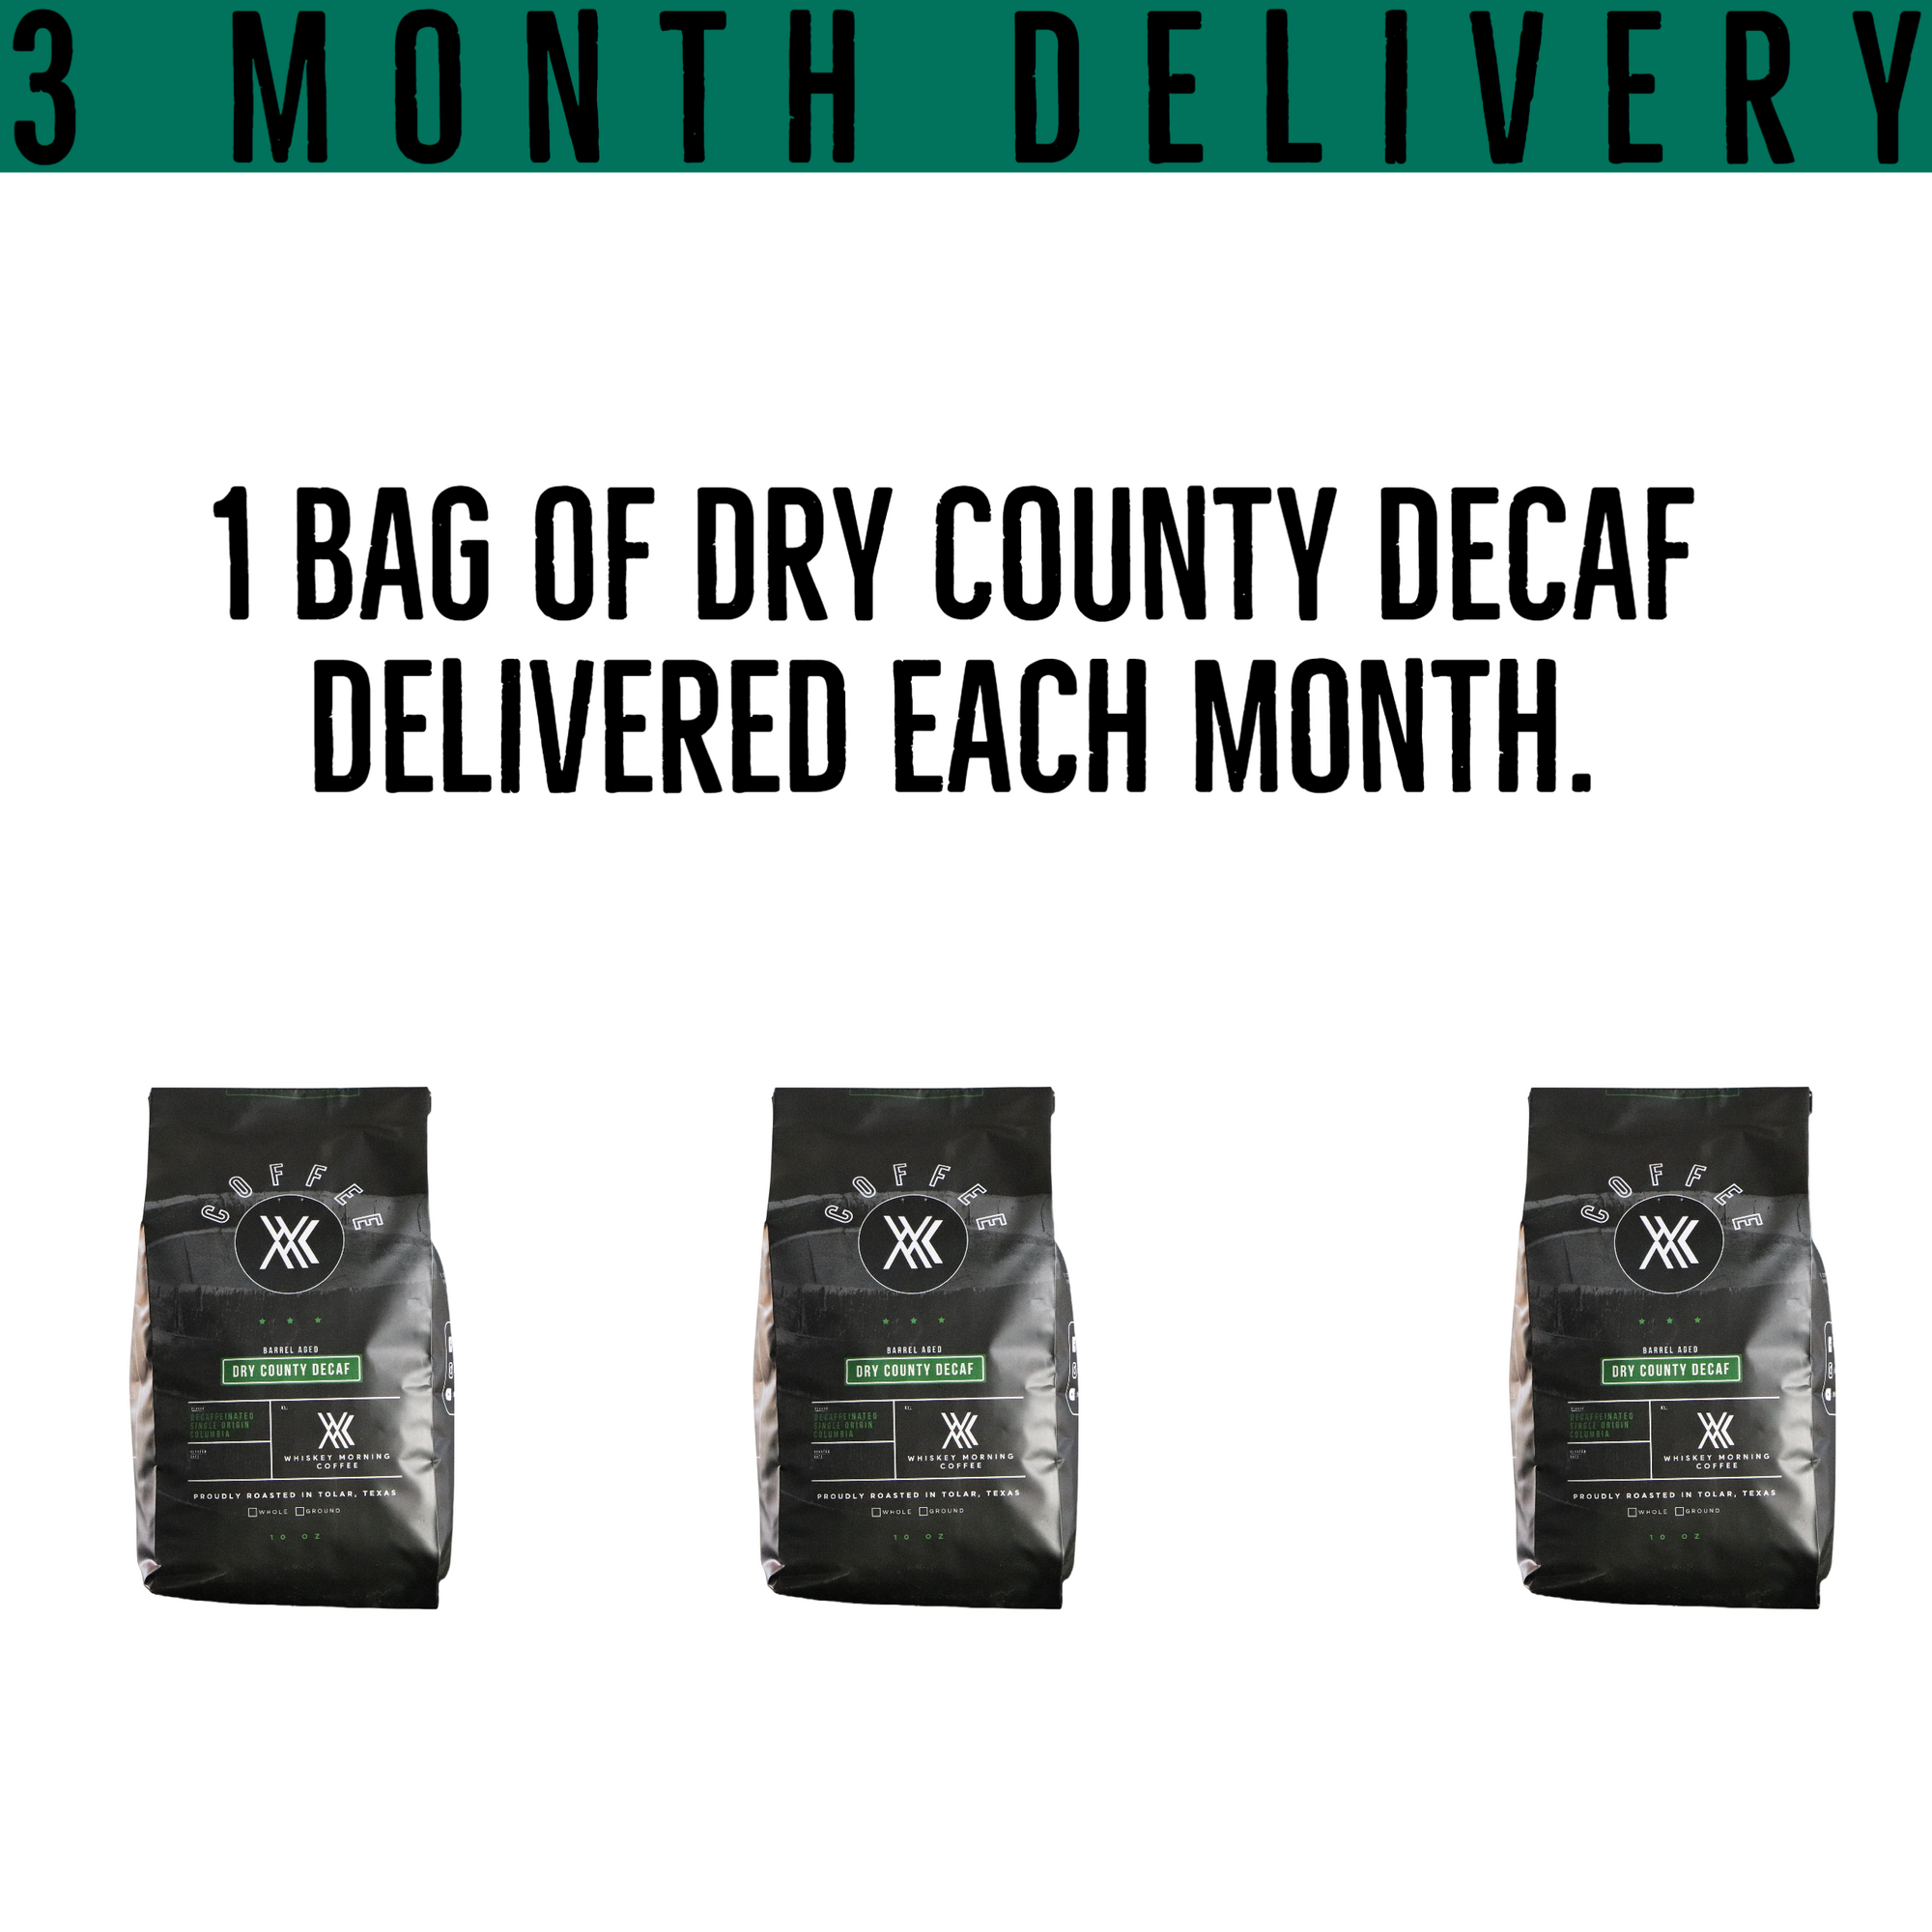 Dry County Decaf 3 month prepaid subscription